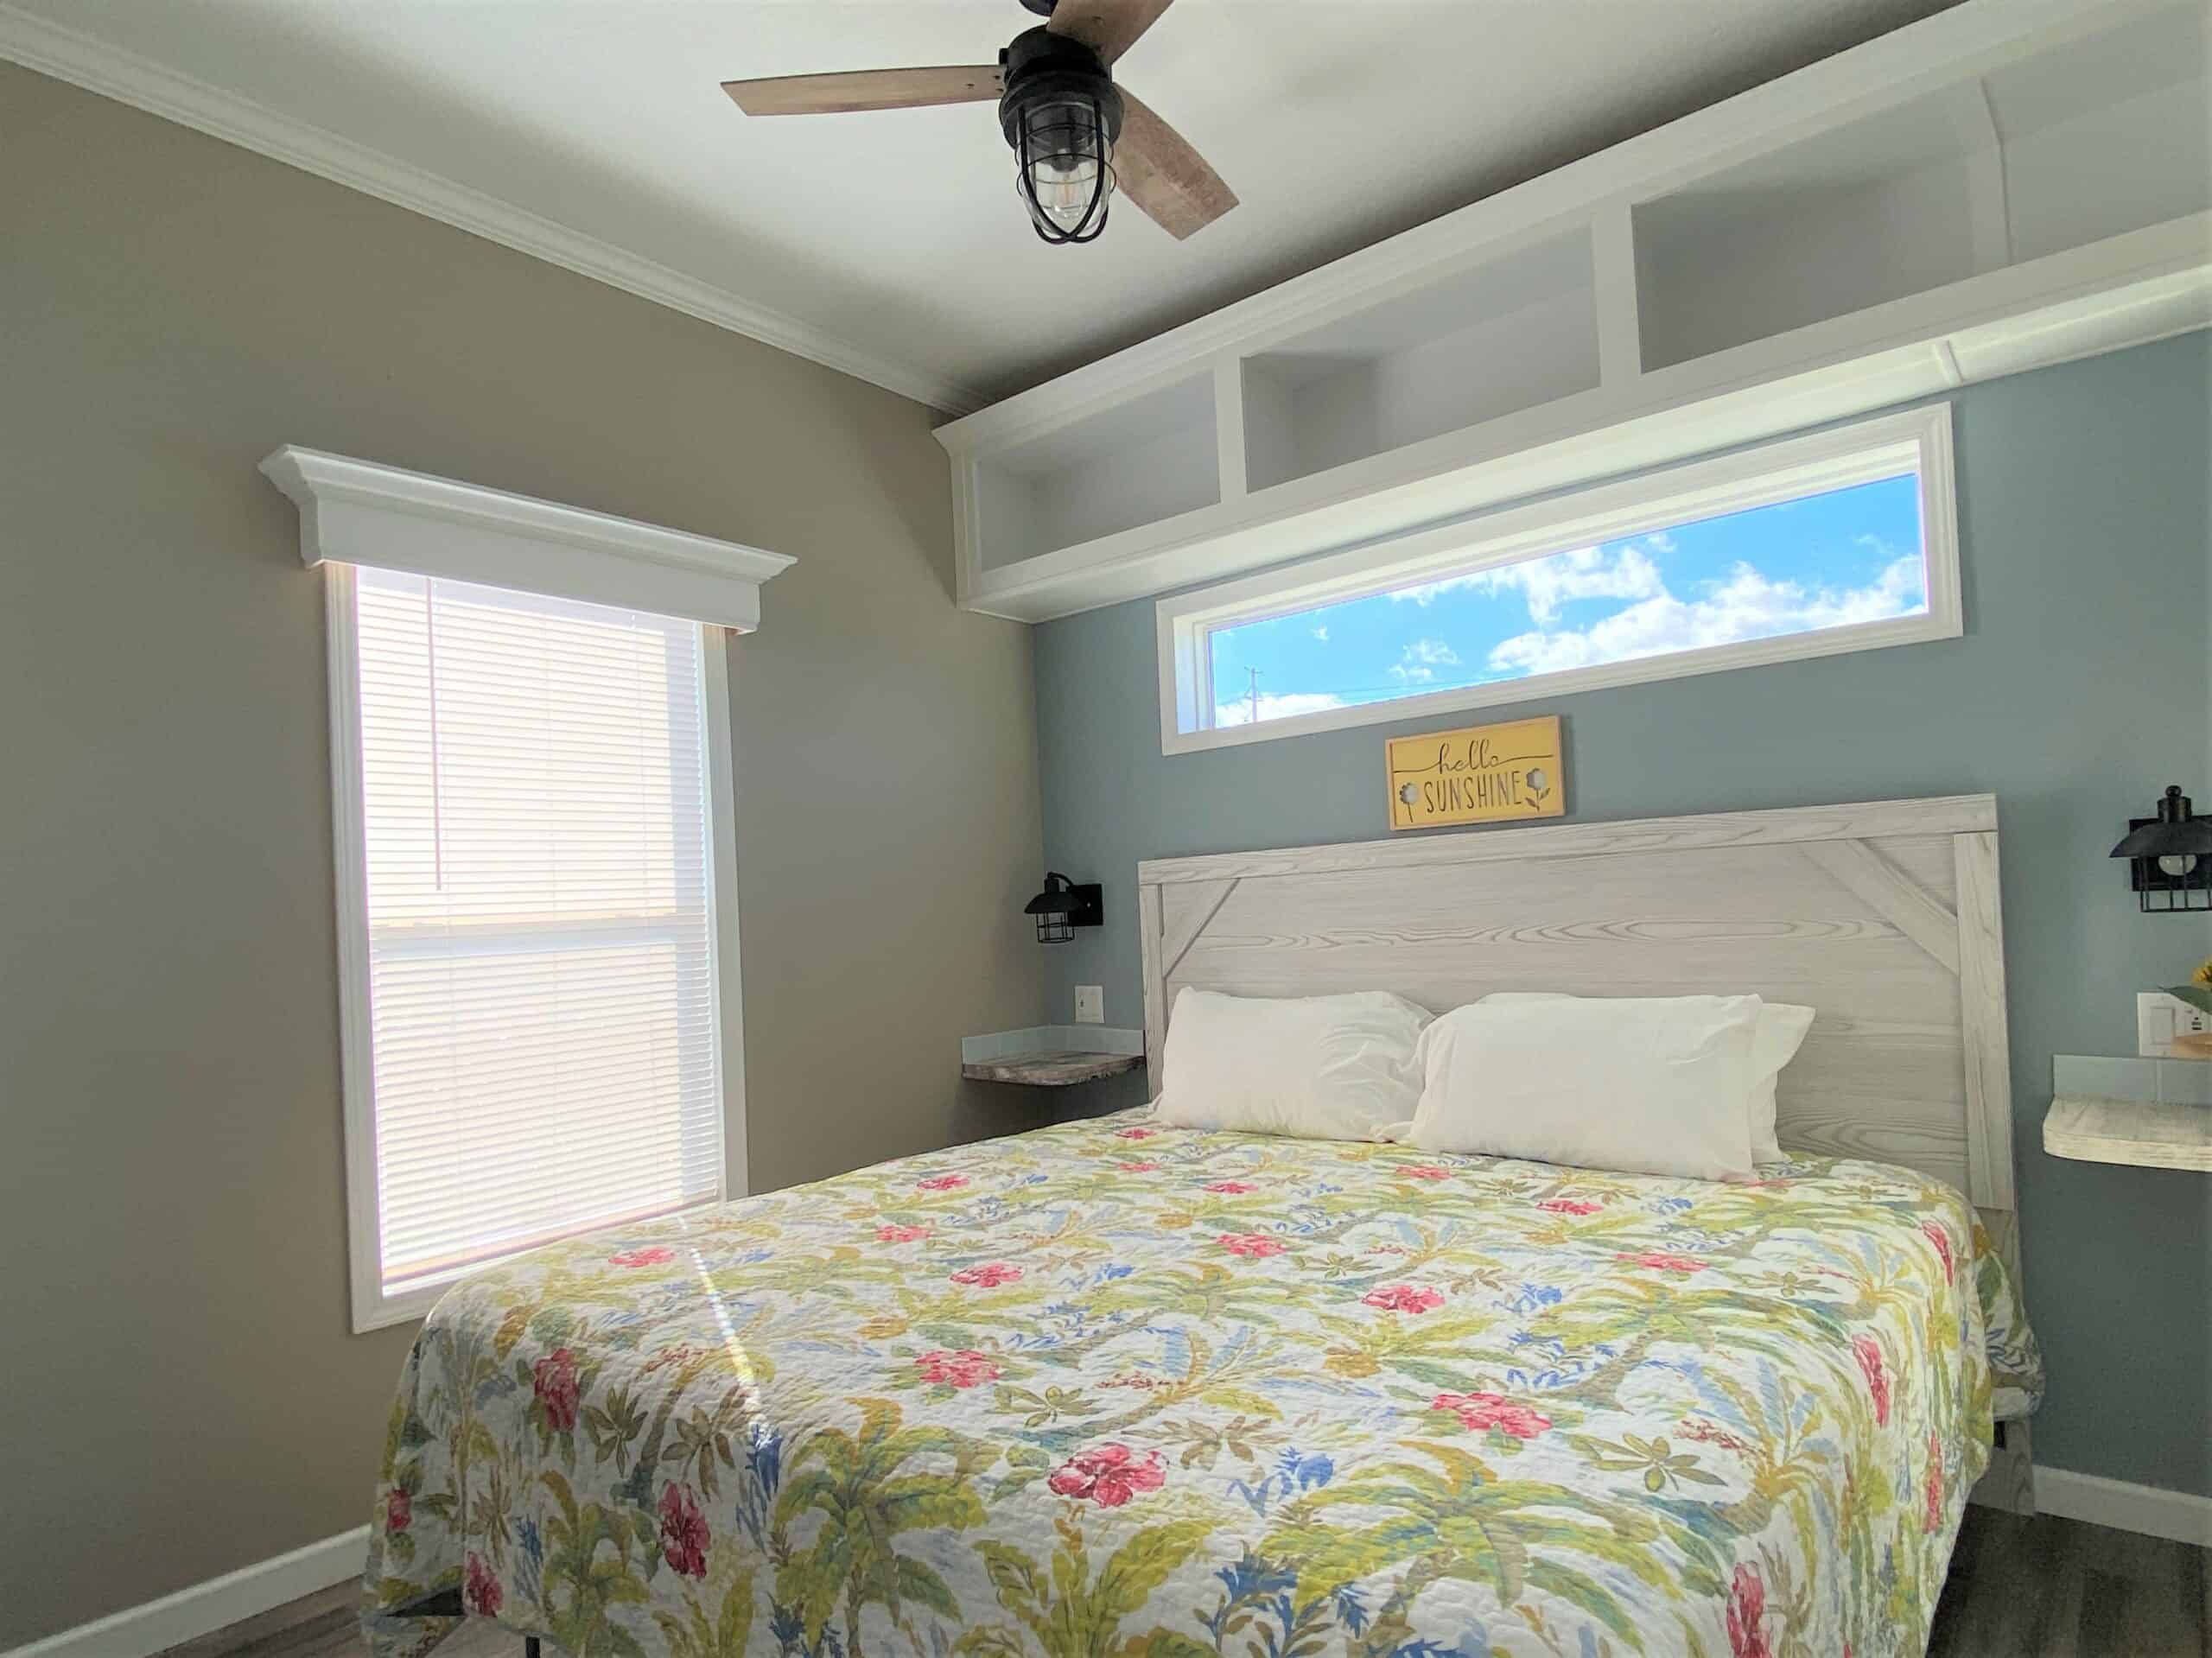 Cabana Club Cottage Bedroom with King Bed has gray and blue soft tone painted walls, a floral comforter blanket and white pillows on the bed with a white wood headbord and a long window show blue skies above it, and a yellow sign that reads "hello sunshine" above the headboard